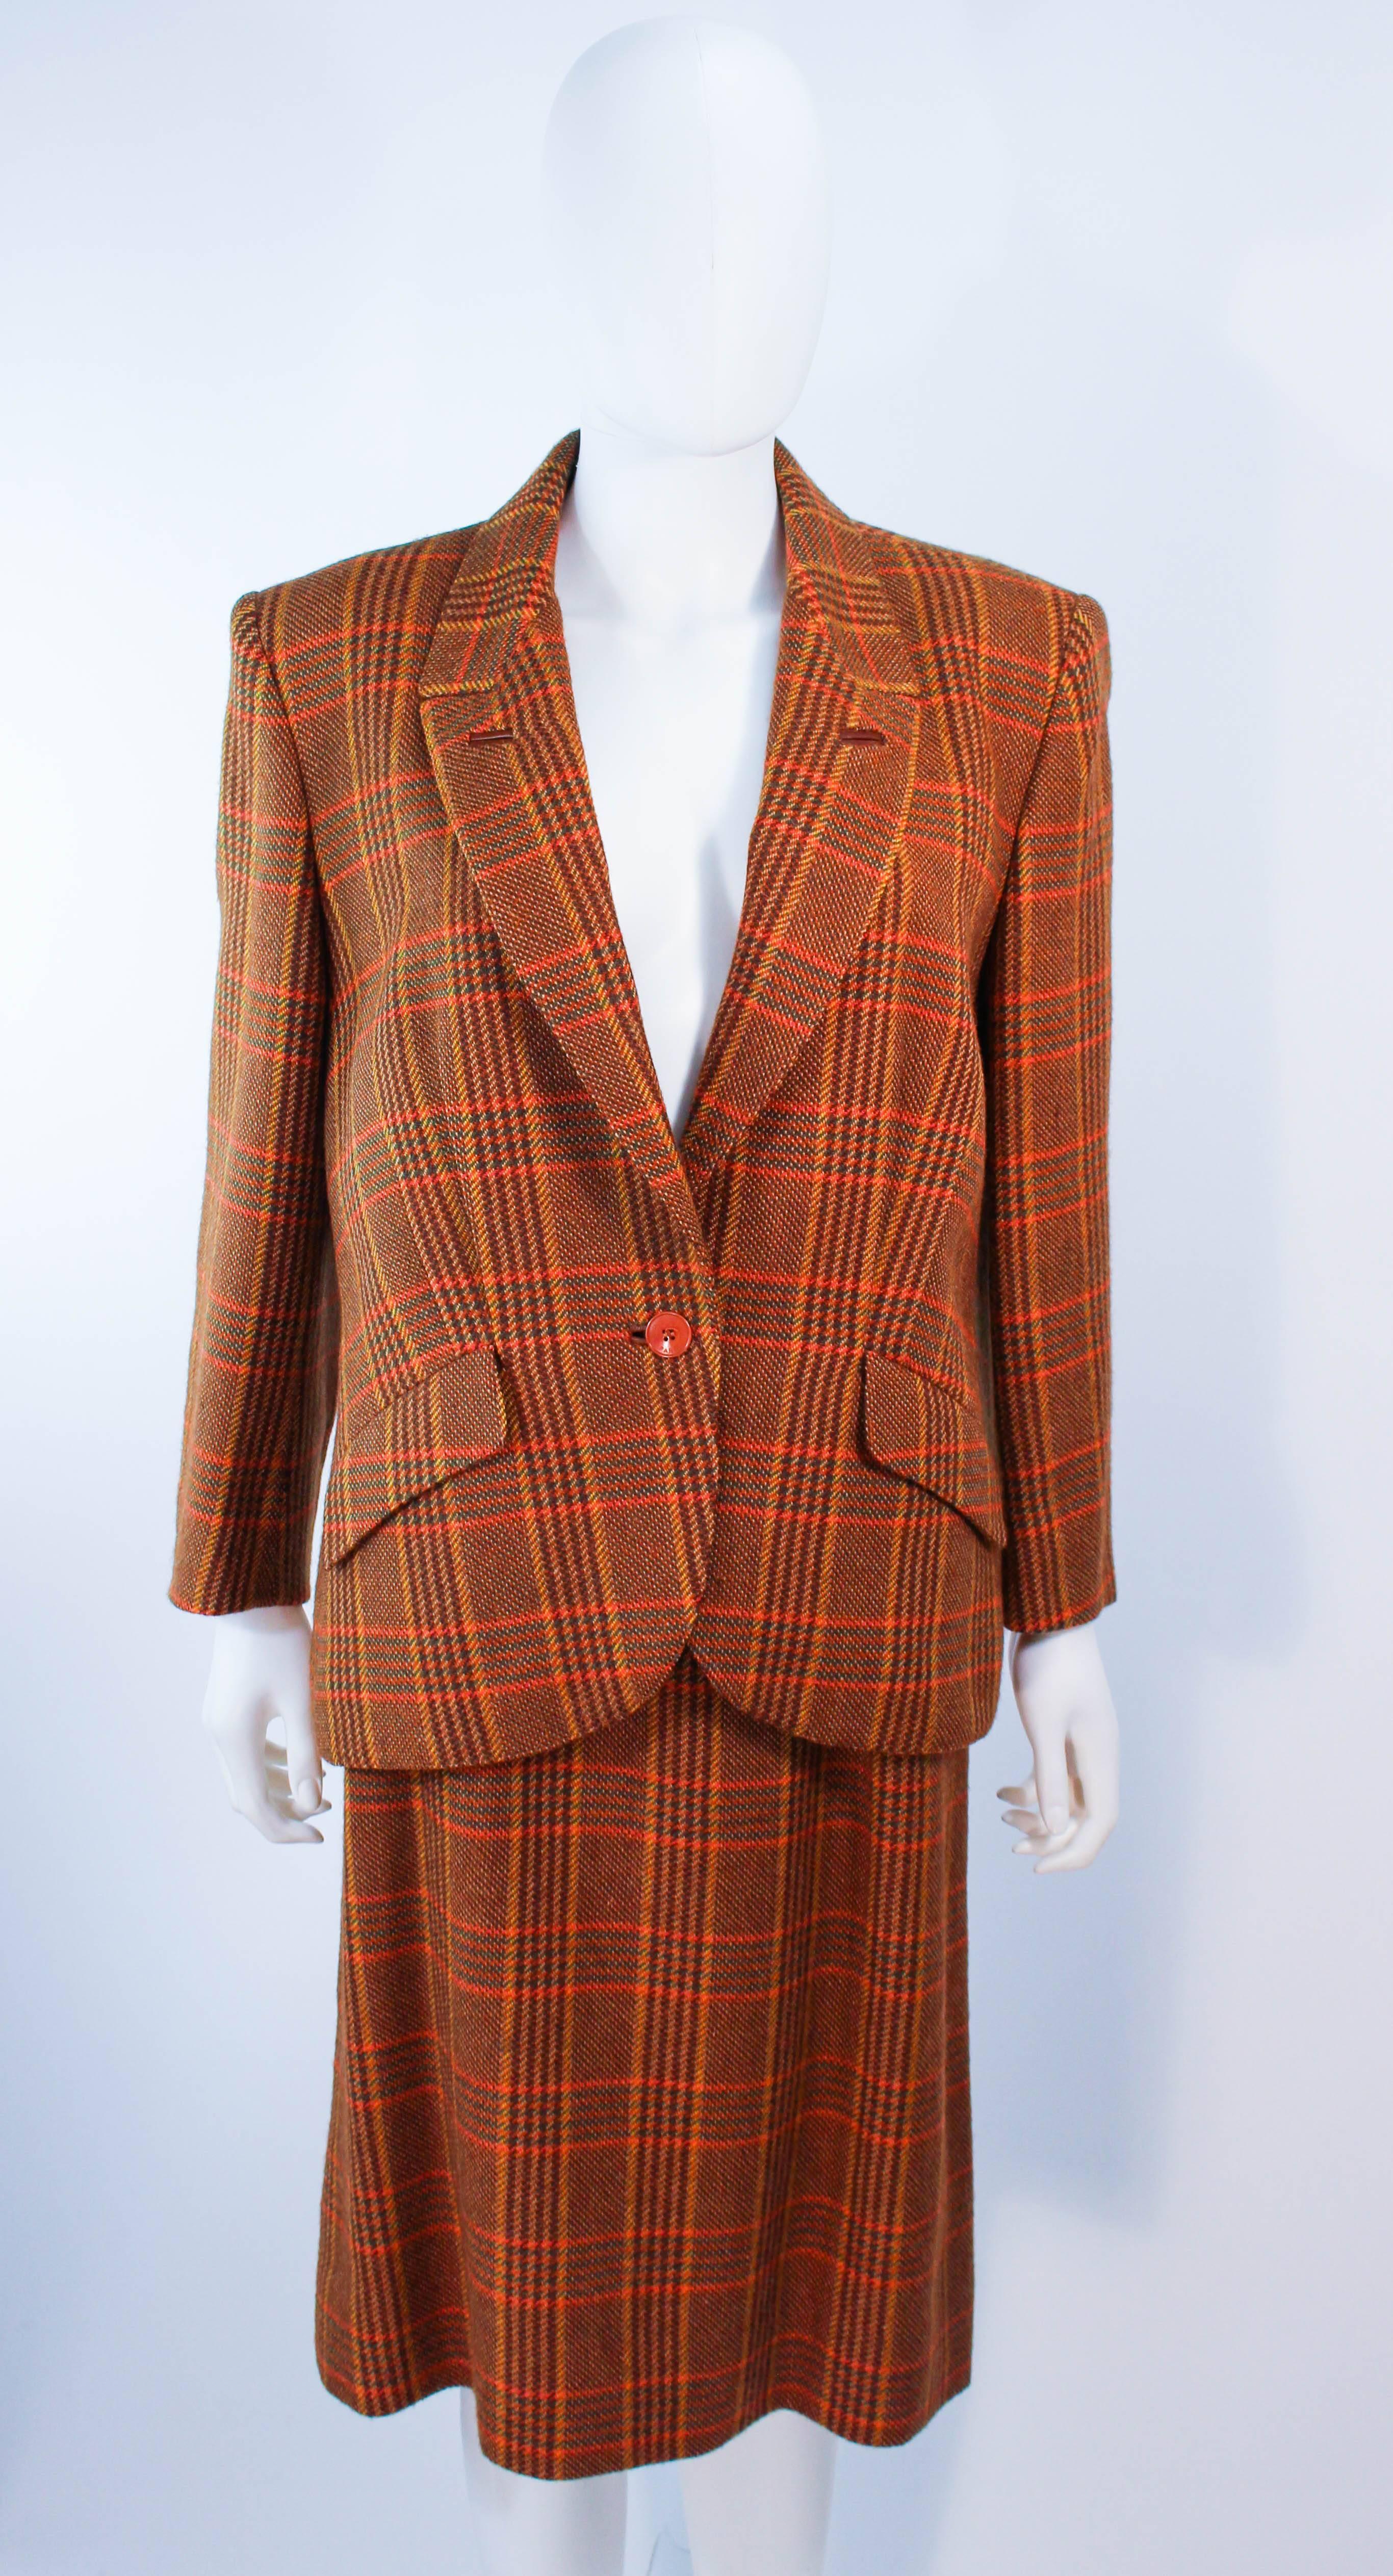 This Hermes skirt suit is composed of a brown plaid wool. The jacket features a center front button closure. The skirt has a zipper closure. In excellent vintage condition.

**Please cross-reference measurements for personal accuracy. Size in